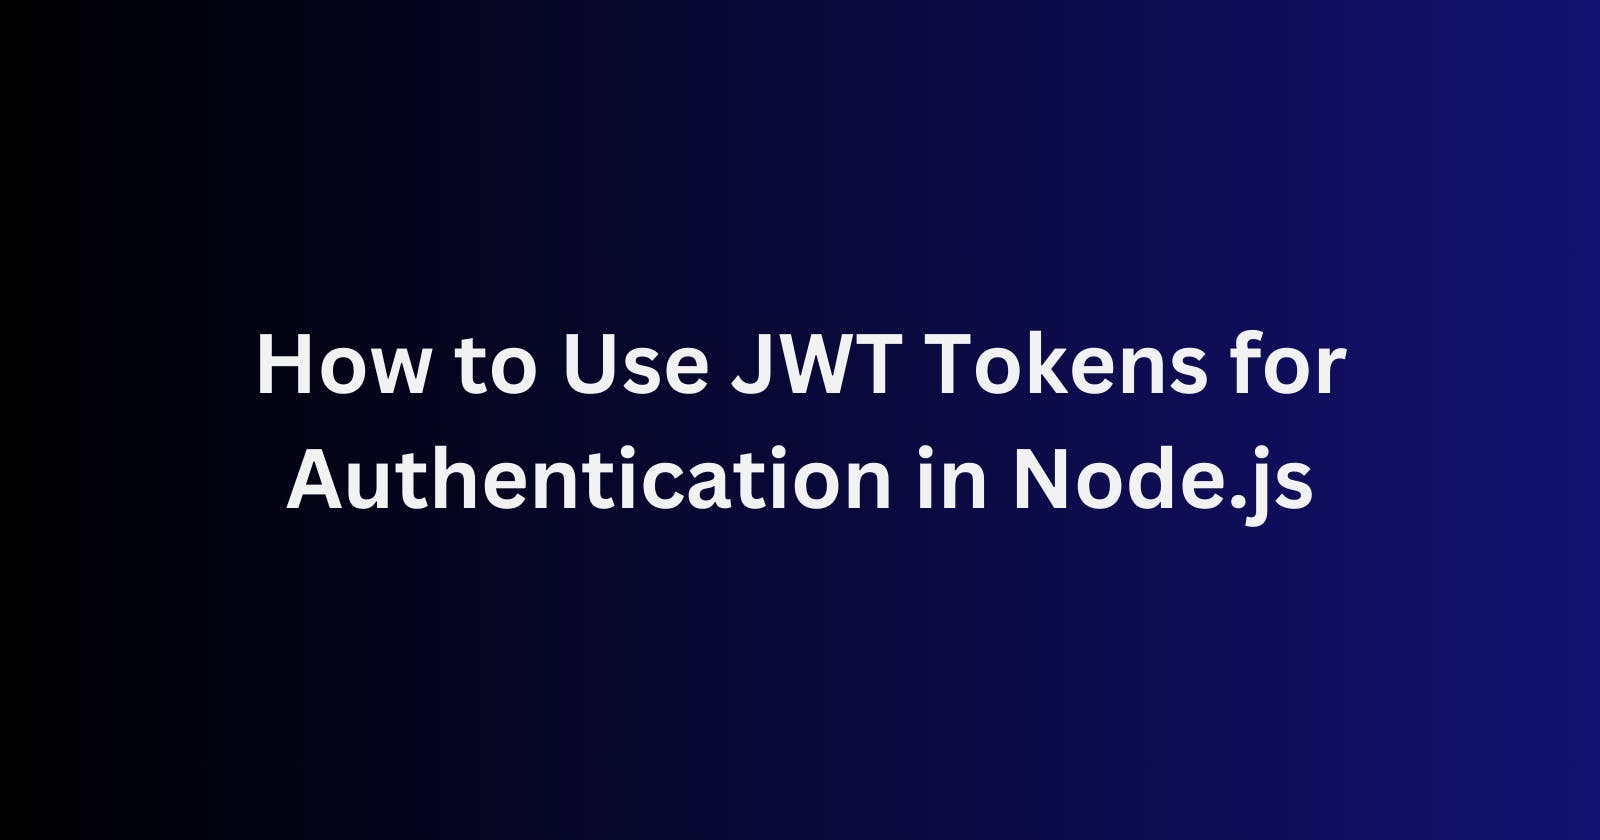 How to Use JWT Tokens for Authentication in Node.js